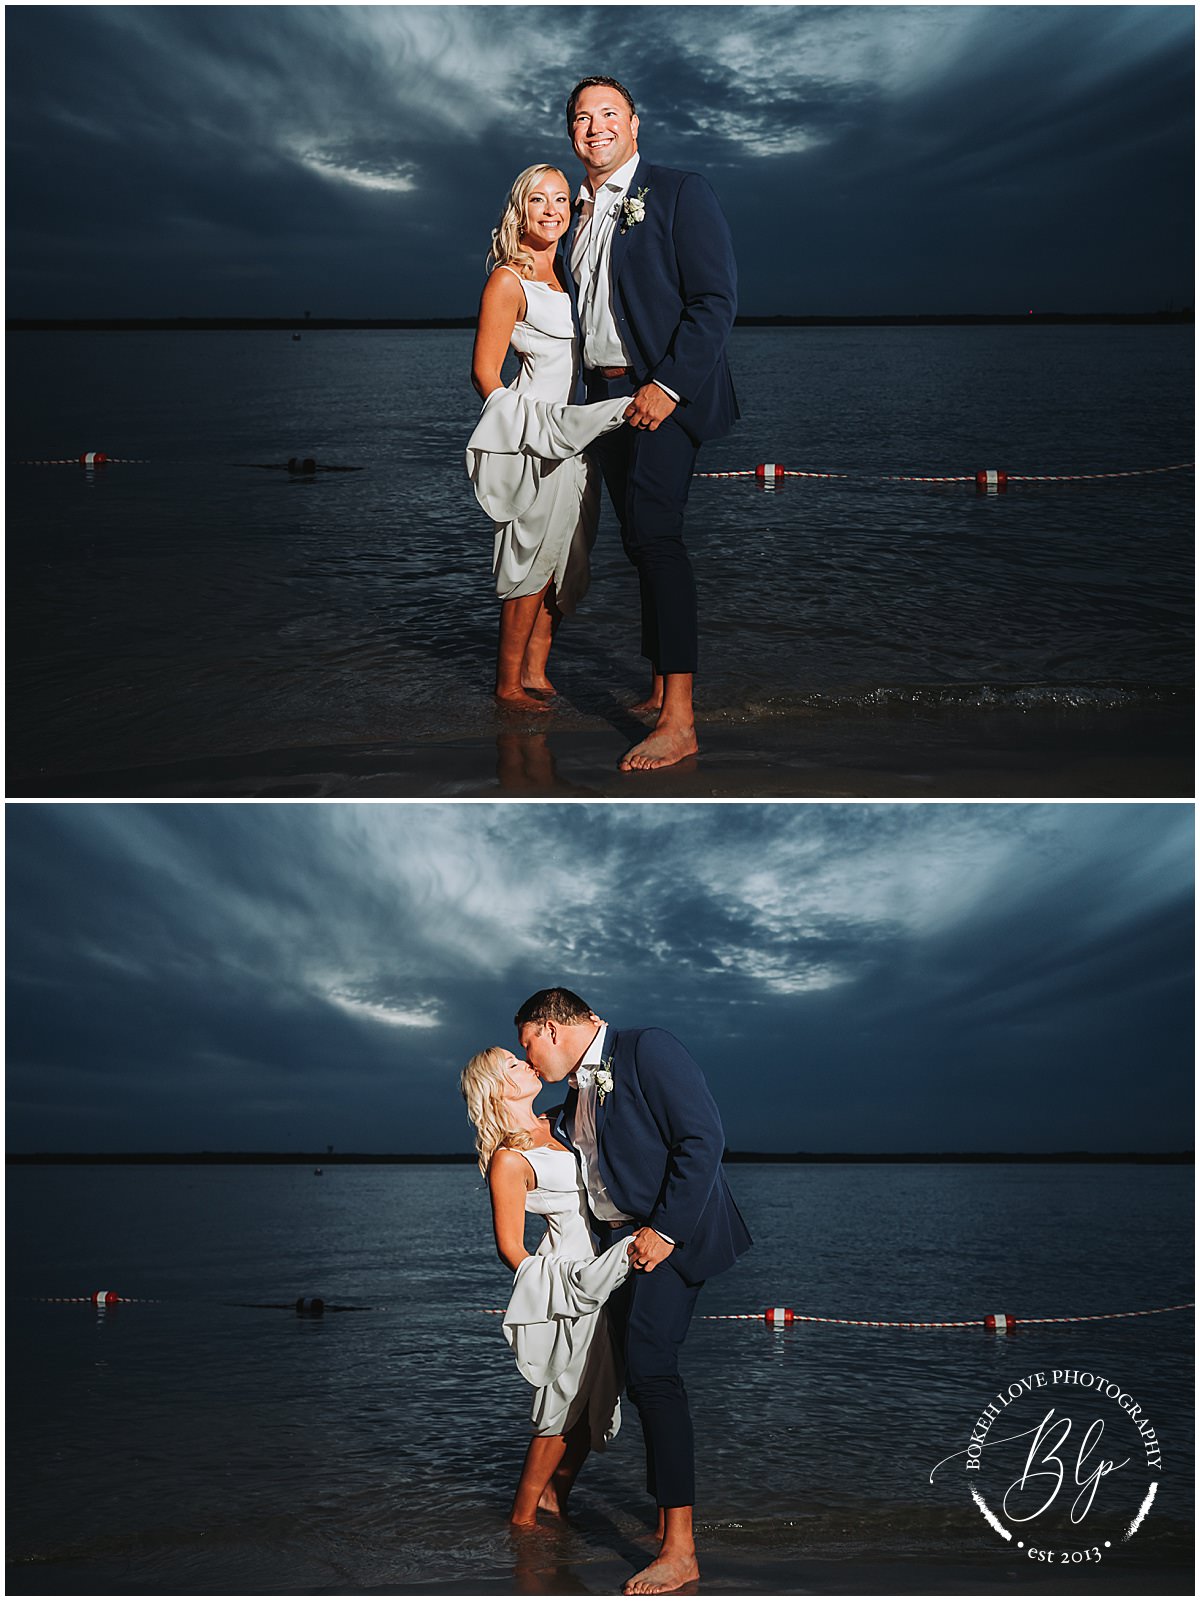 Wedding Photography by Bokeh Love Photography, end of night image with bride and groom standing in bay with night sky